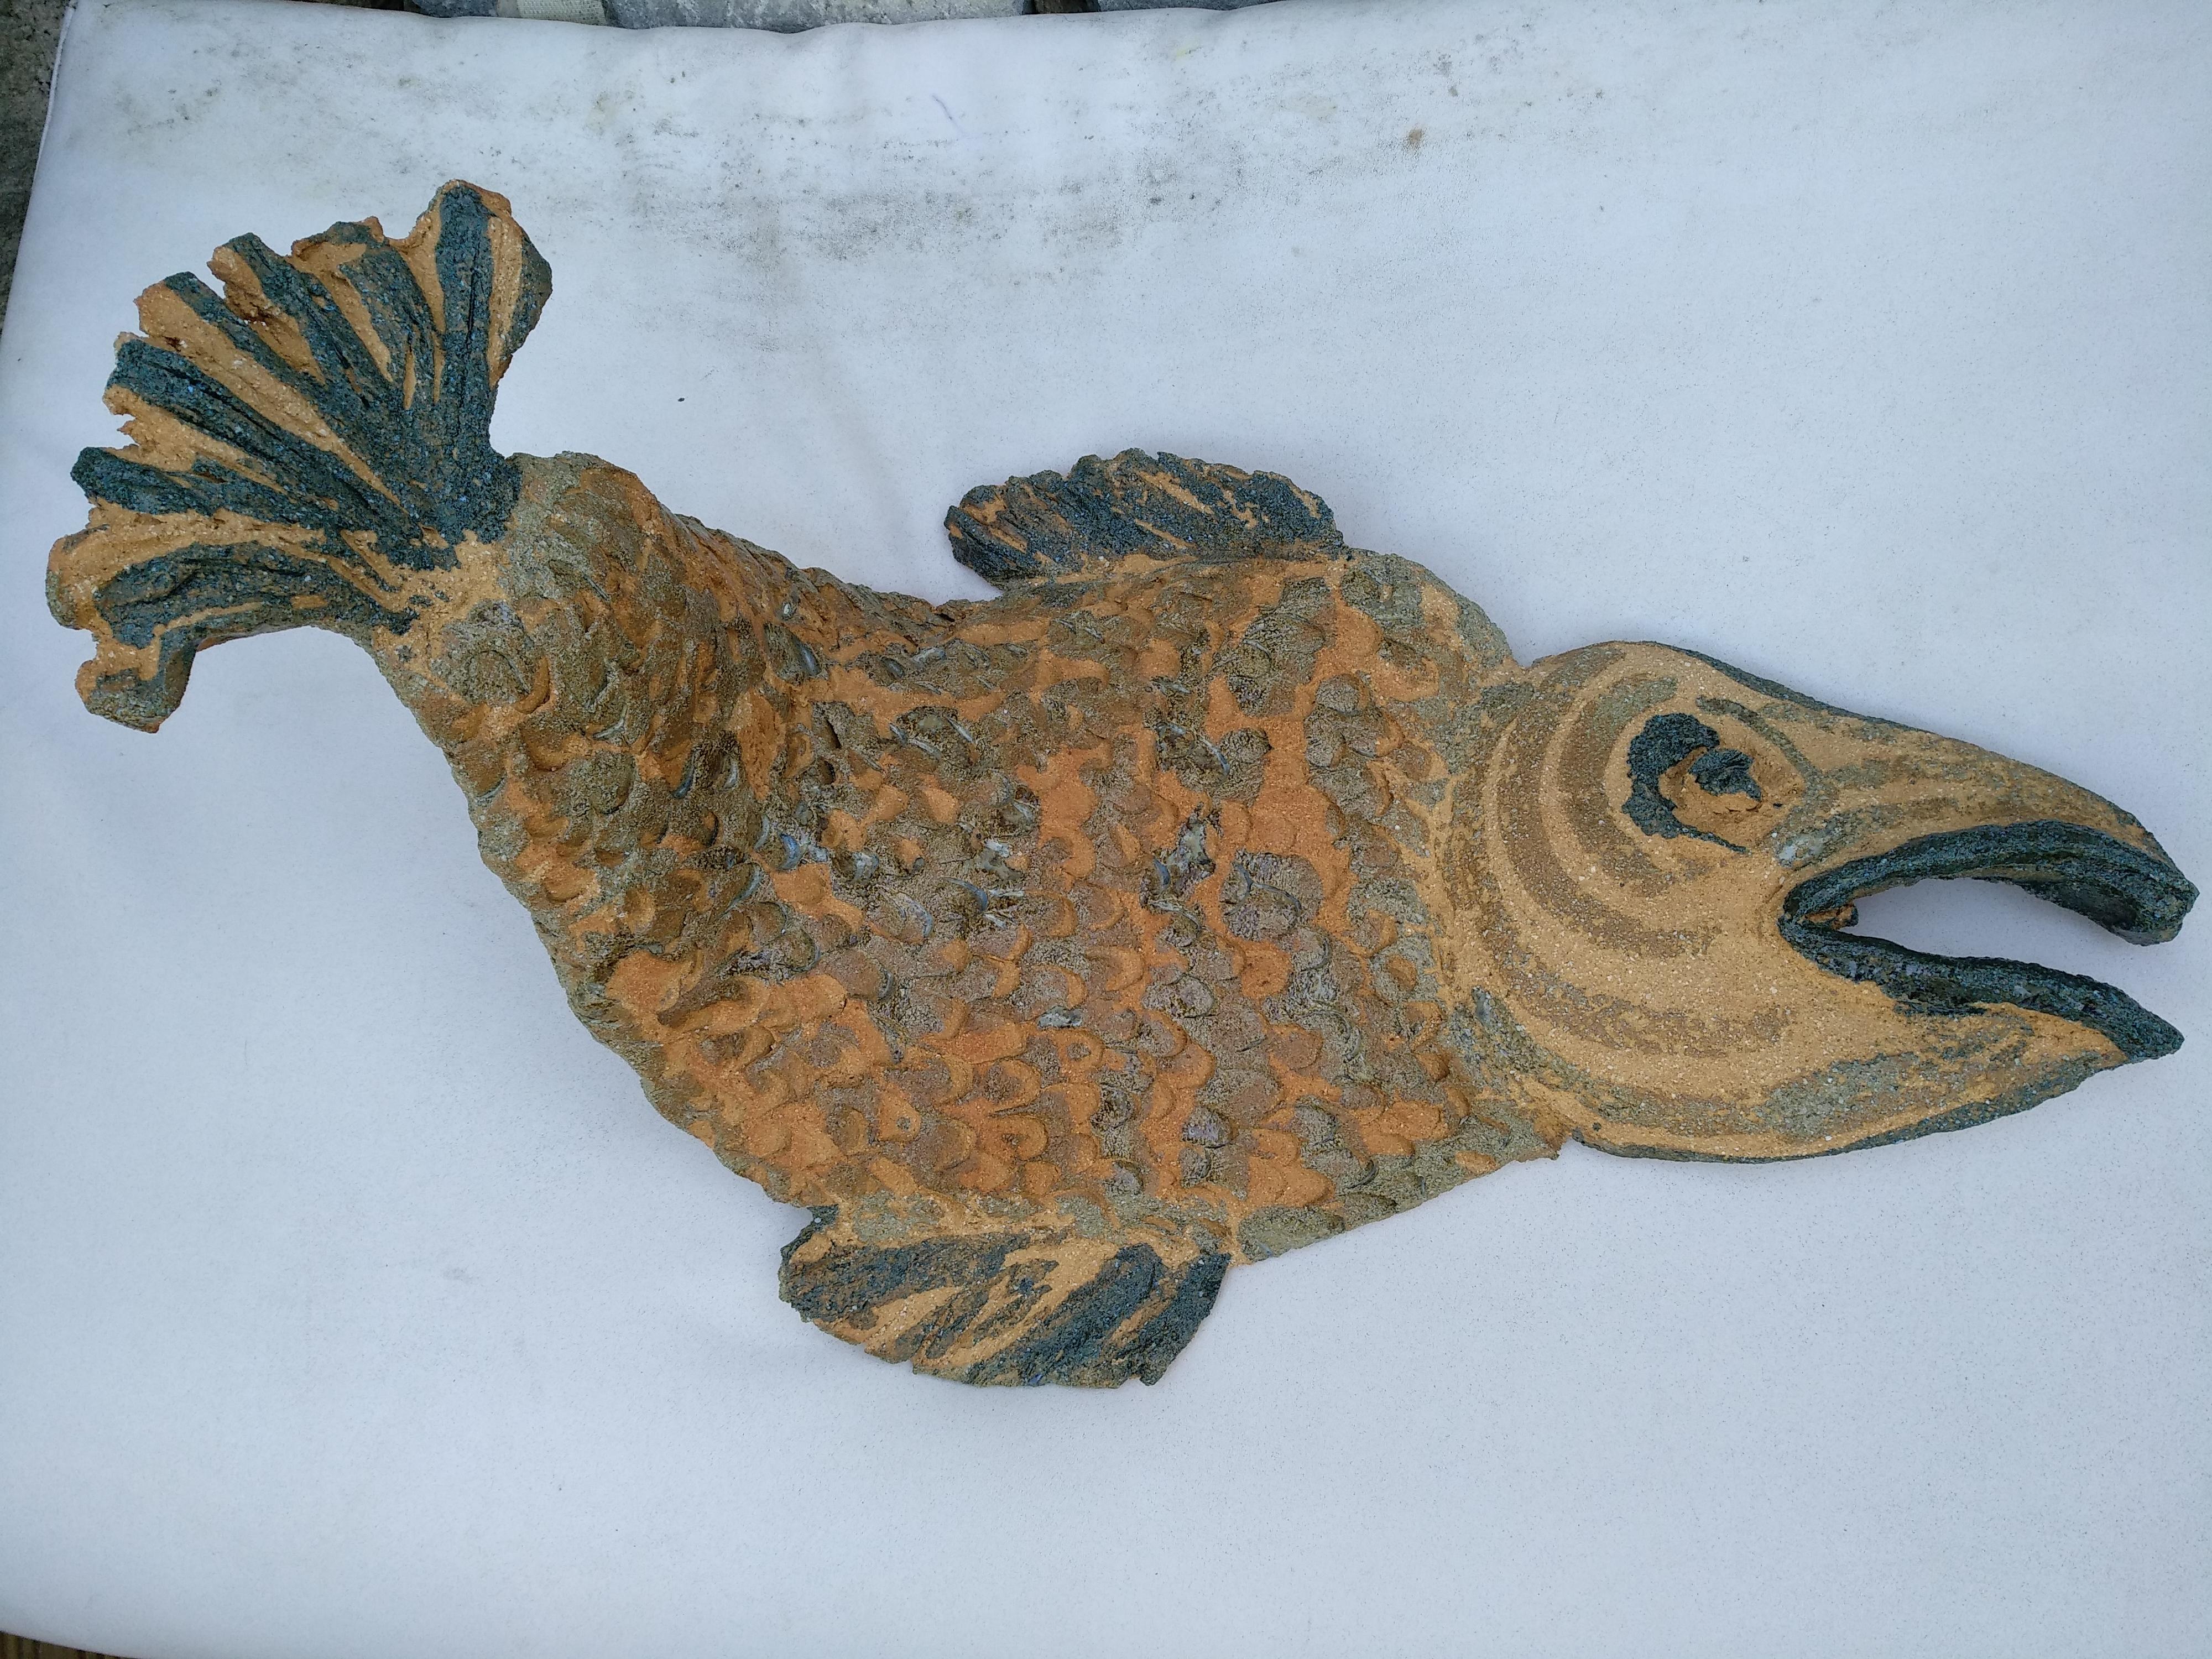 Part of Nicole Durand maritime collection, this colorful imaginary fish is done in ceramic.
As a stone carver, Nicole Durand shows all the movements and details in the fish, like the wave energy, that makes him look very alive…... 
It can be used as